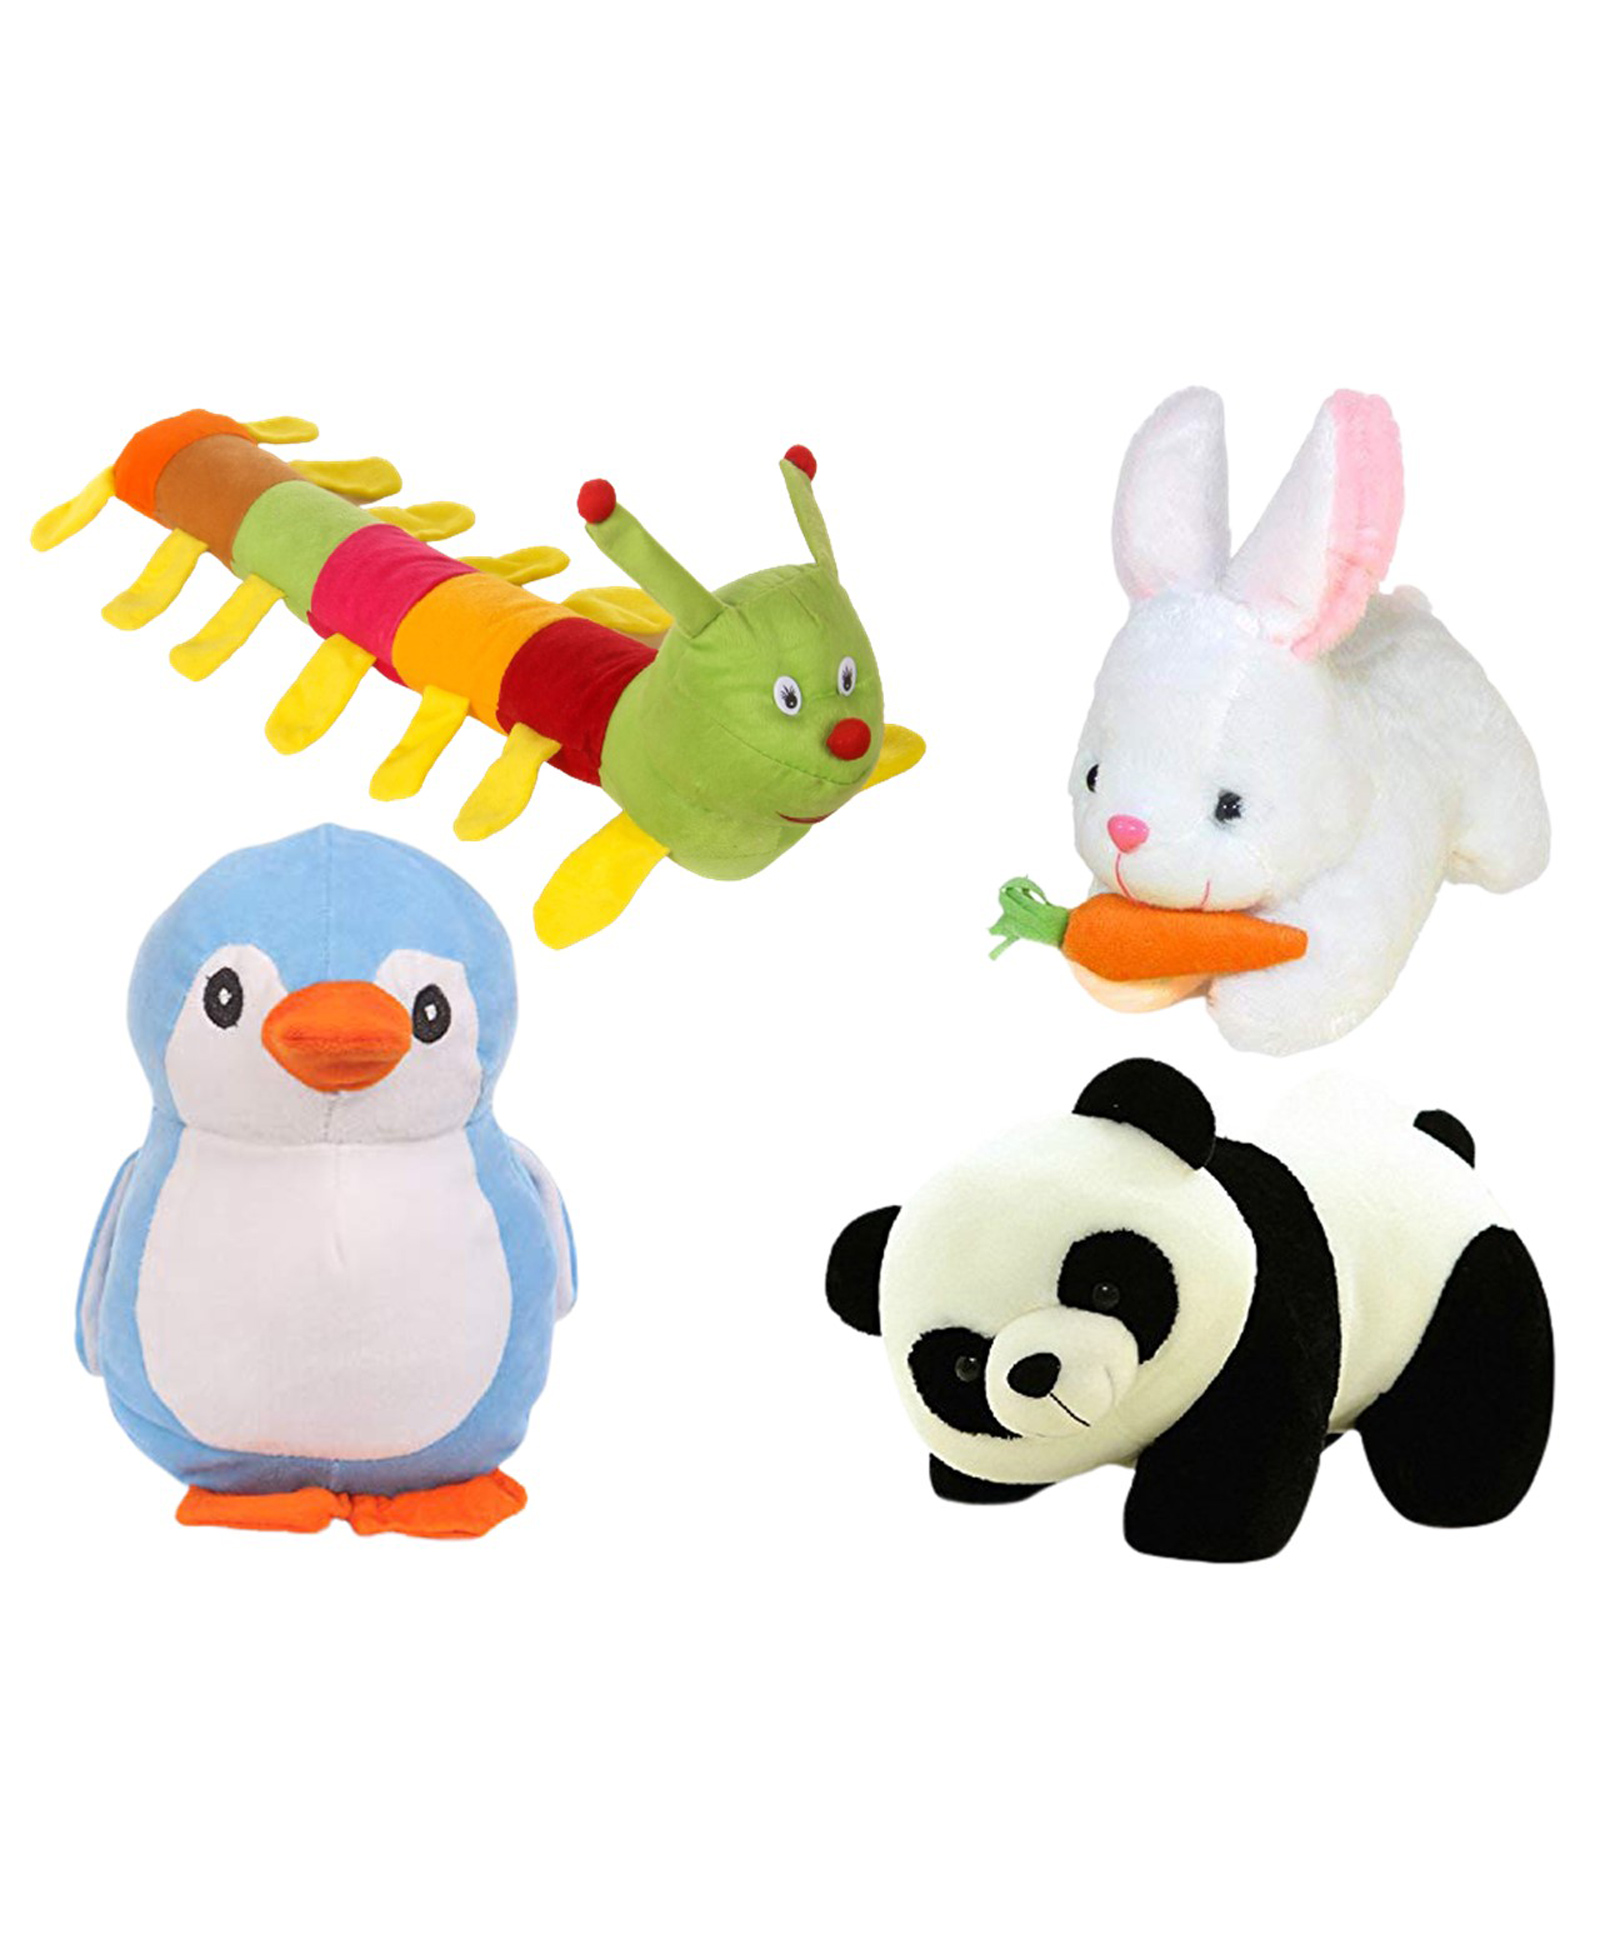 Deals India Plush Animal Soft Toy Set of 4 Multicolor - Height 25 cm Online  India, Buy Soft Toys for (3-15 Years) at  - 10488472